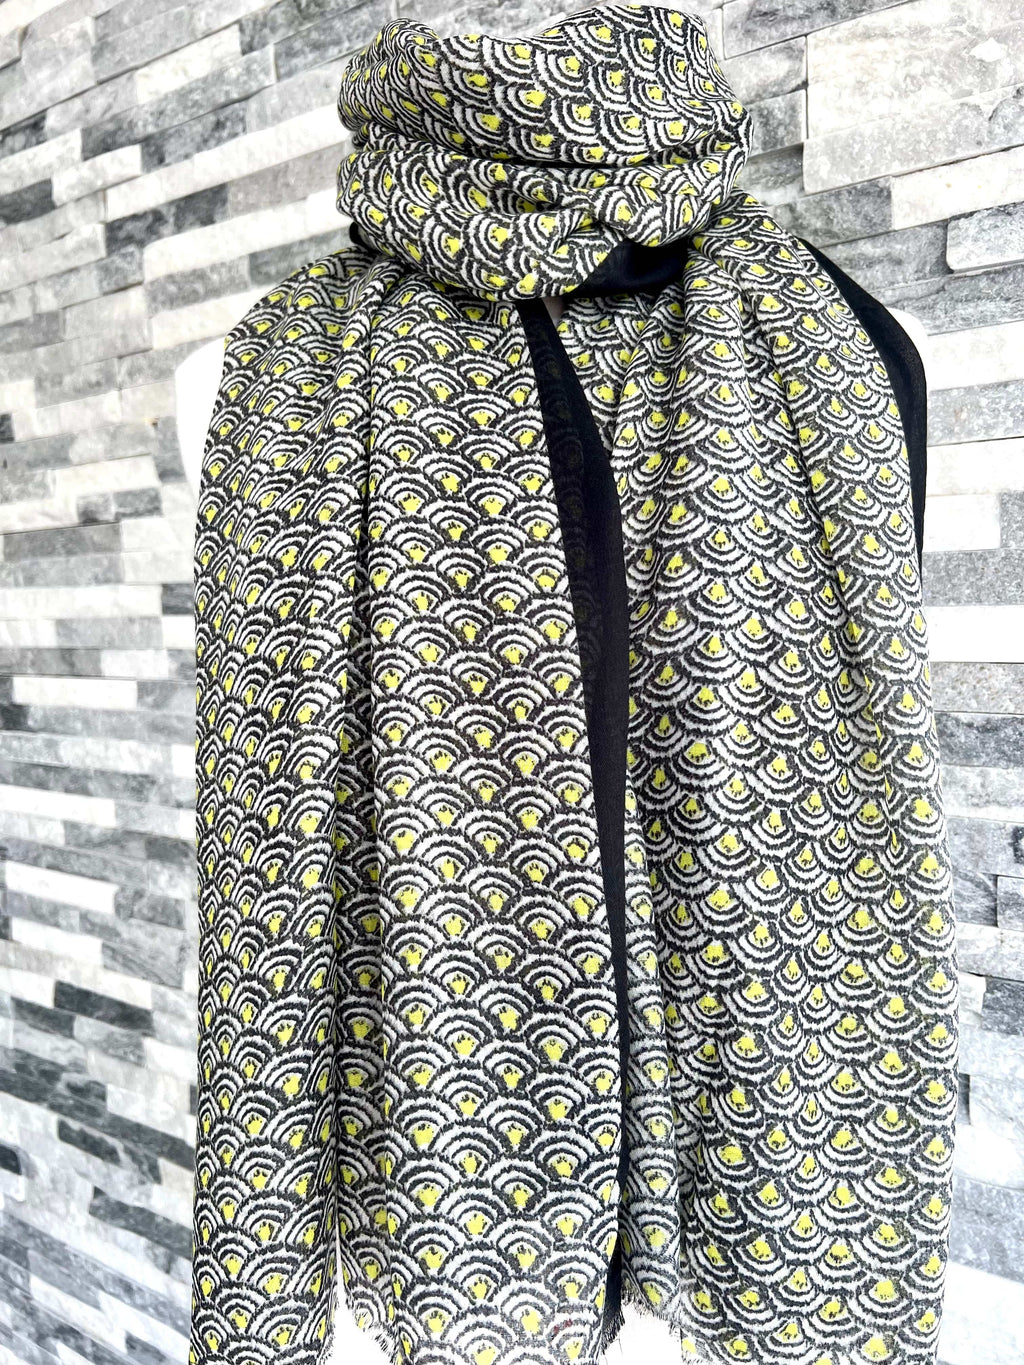 lusciousscarves Scarves Neon Yellow, Black and White Geo Print Light Weight Scarf